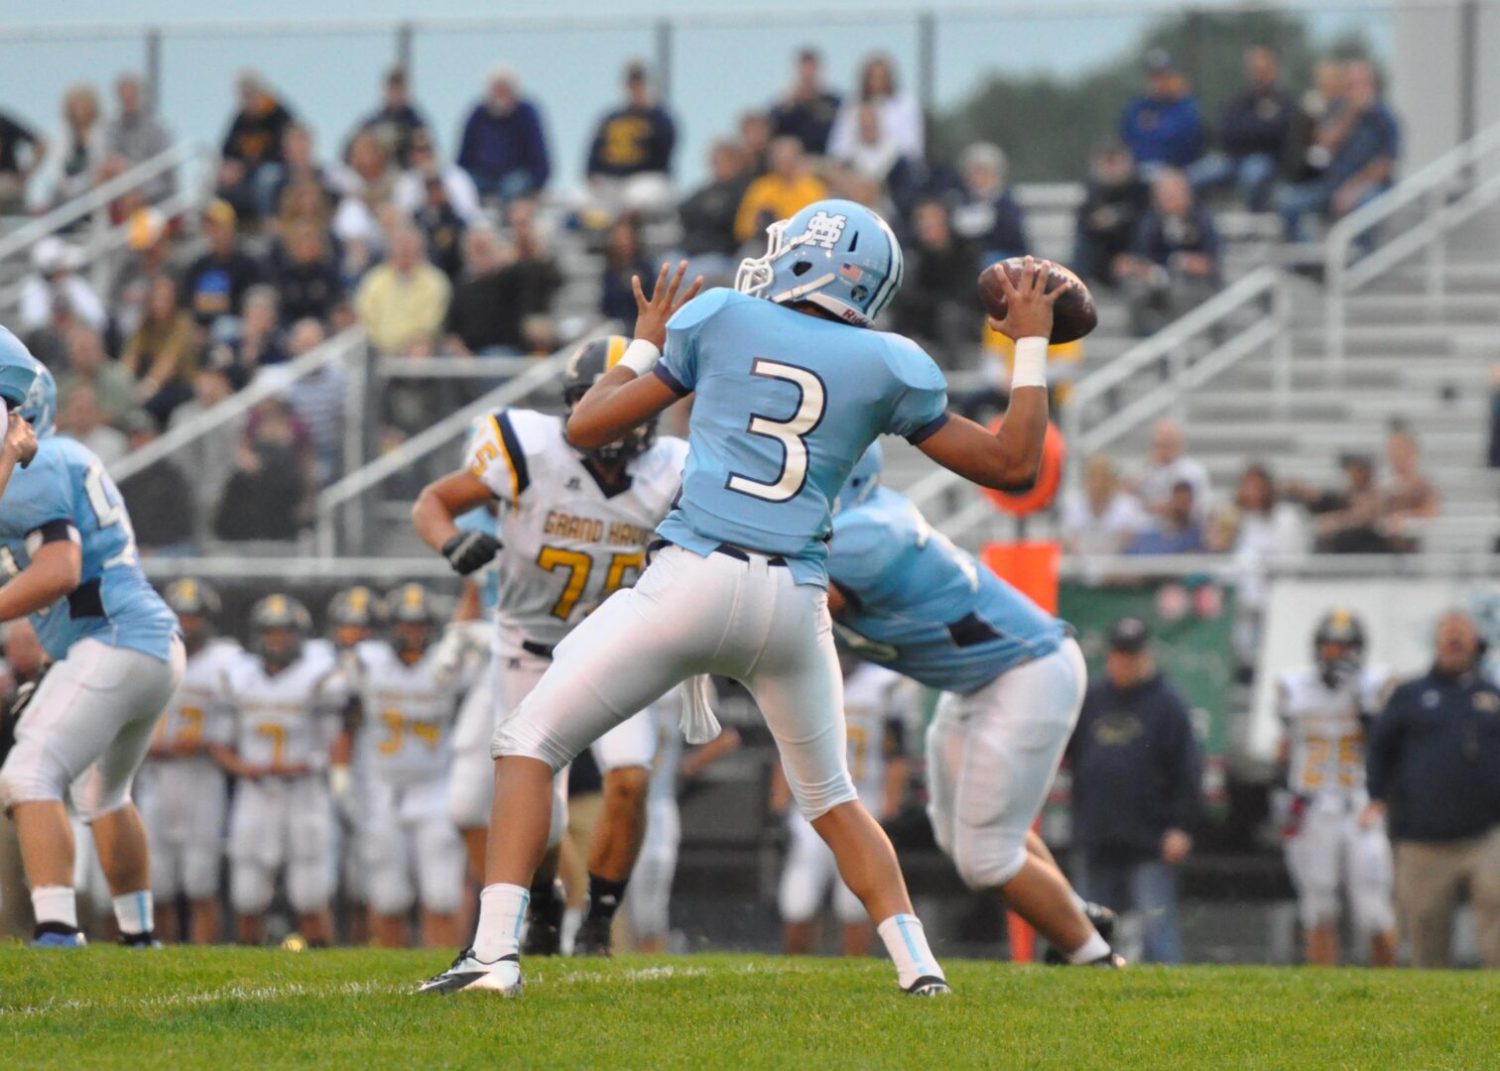 Mona Shores stays unbeaten with win over Grand Haven; Big Reds up next